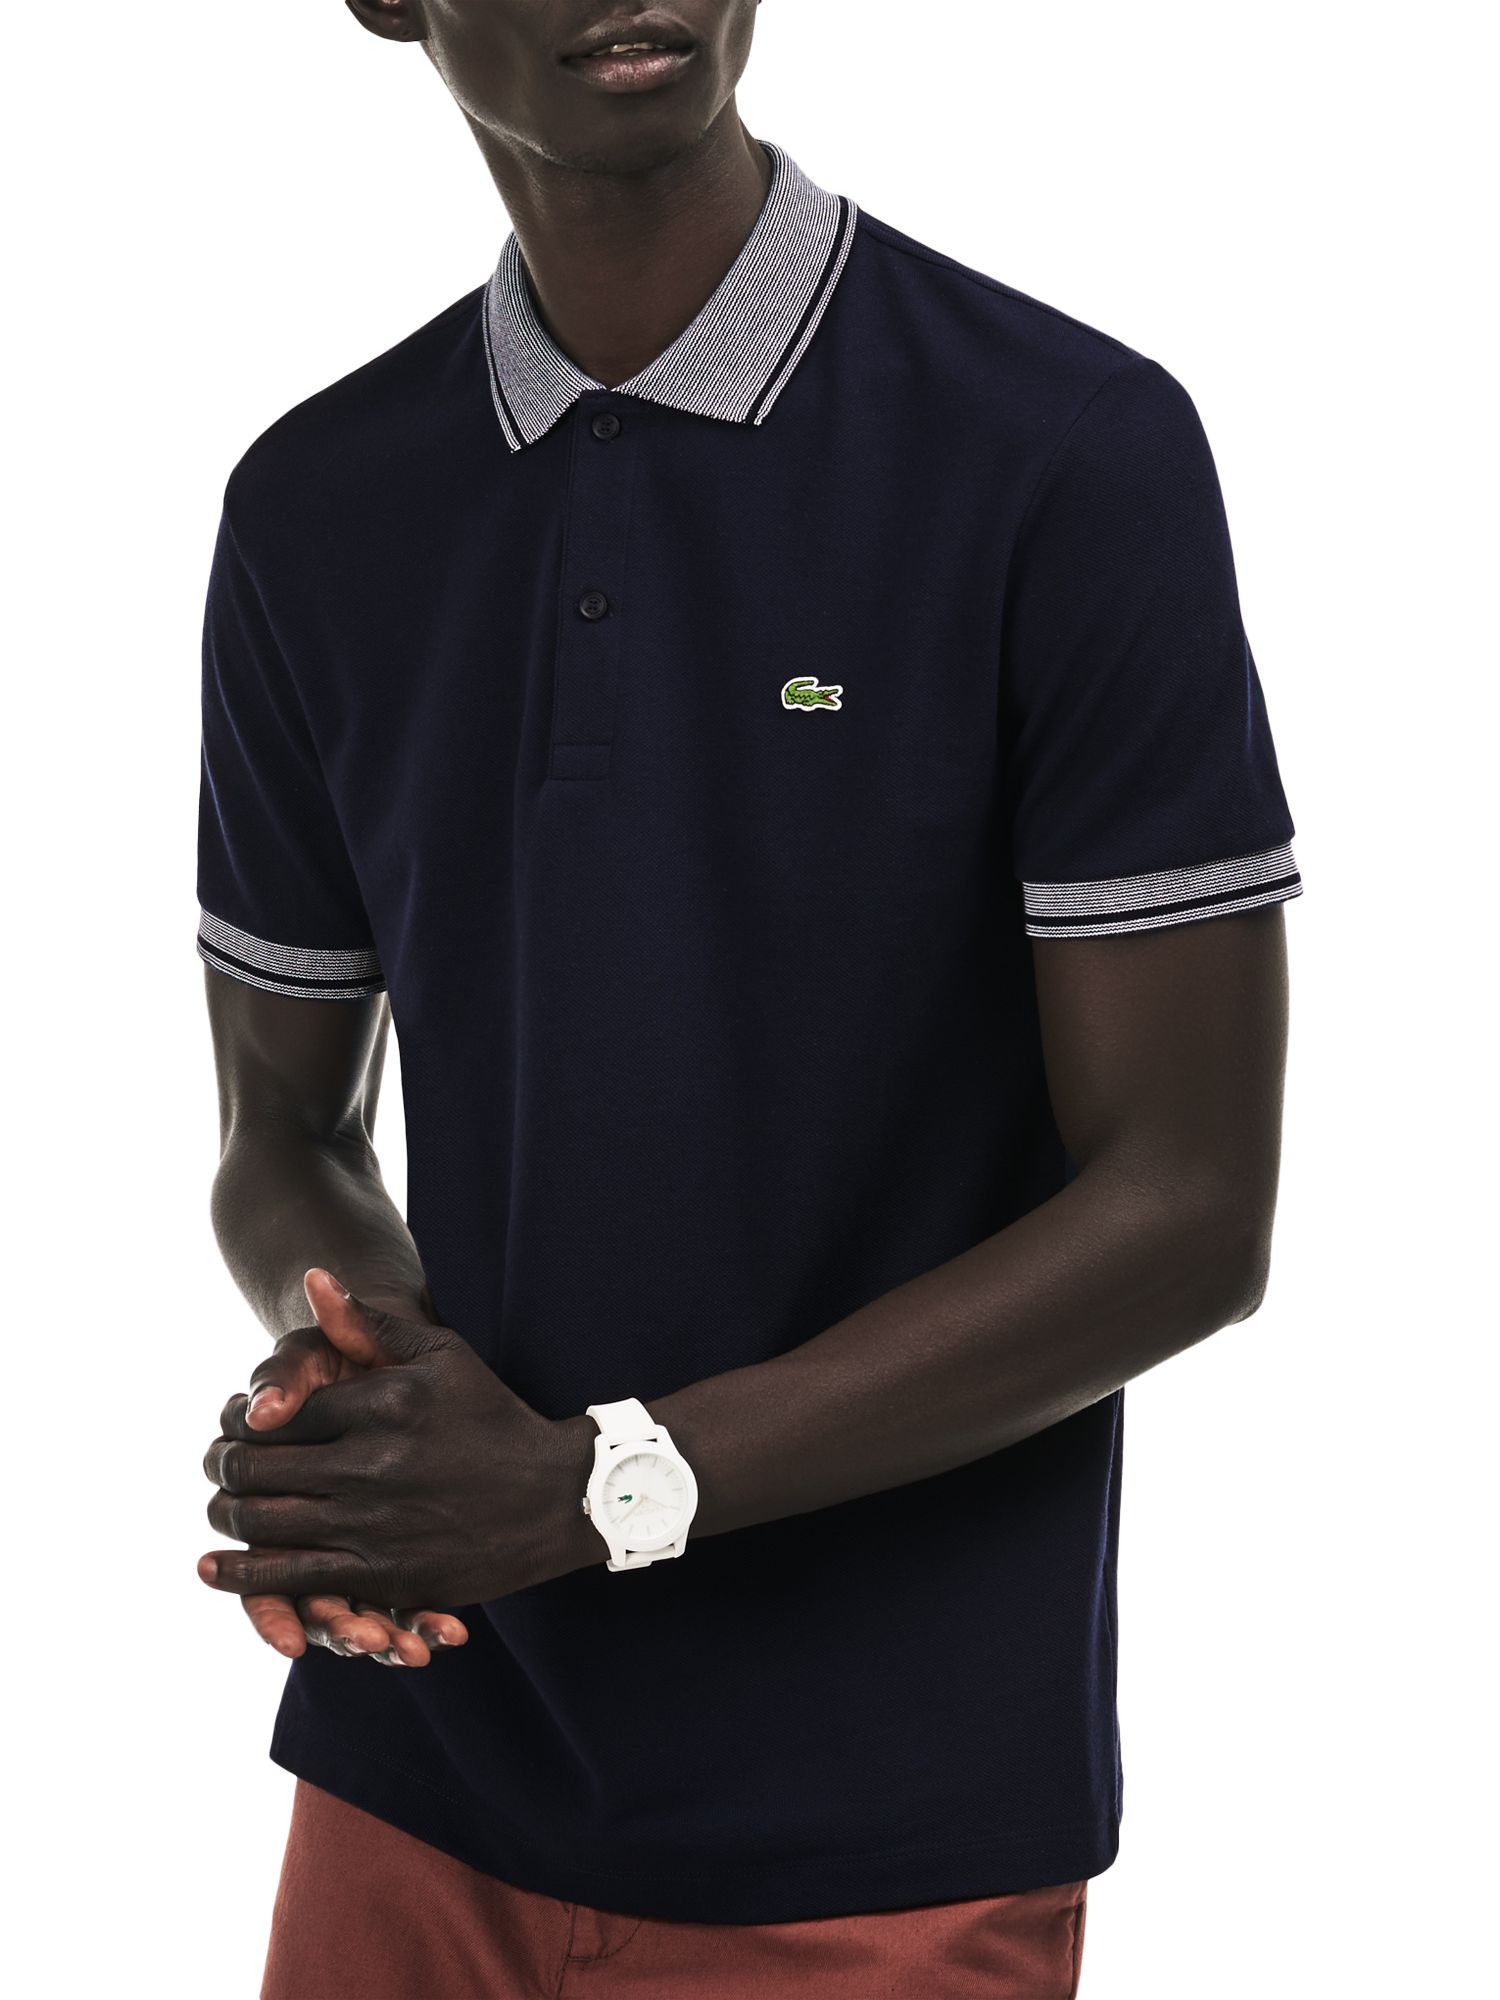 Lacoste Regular Fit Woven Collar Short Sleeve Polo Shirt, Navy/White, L